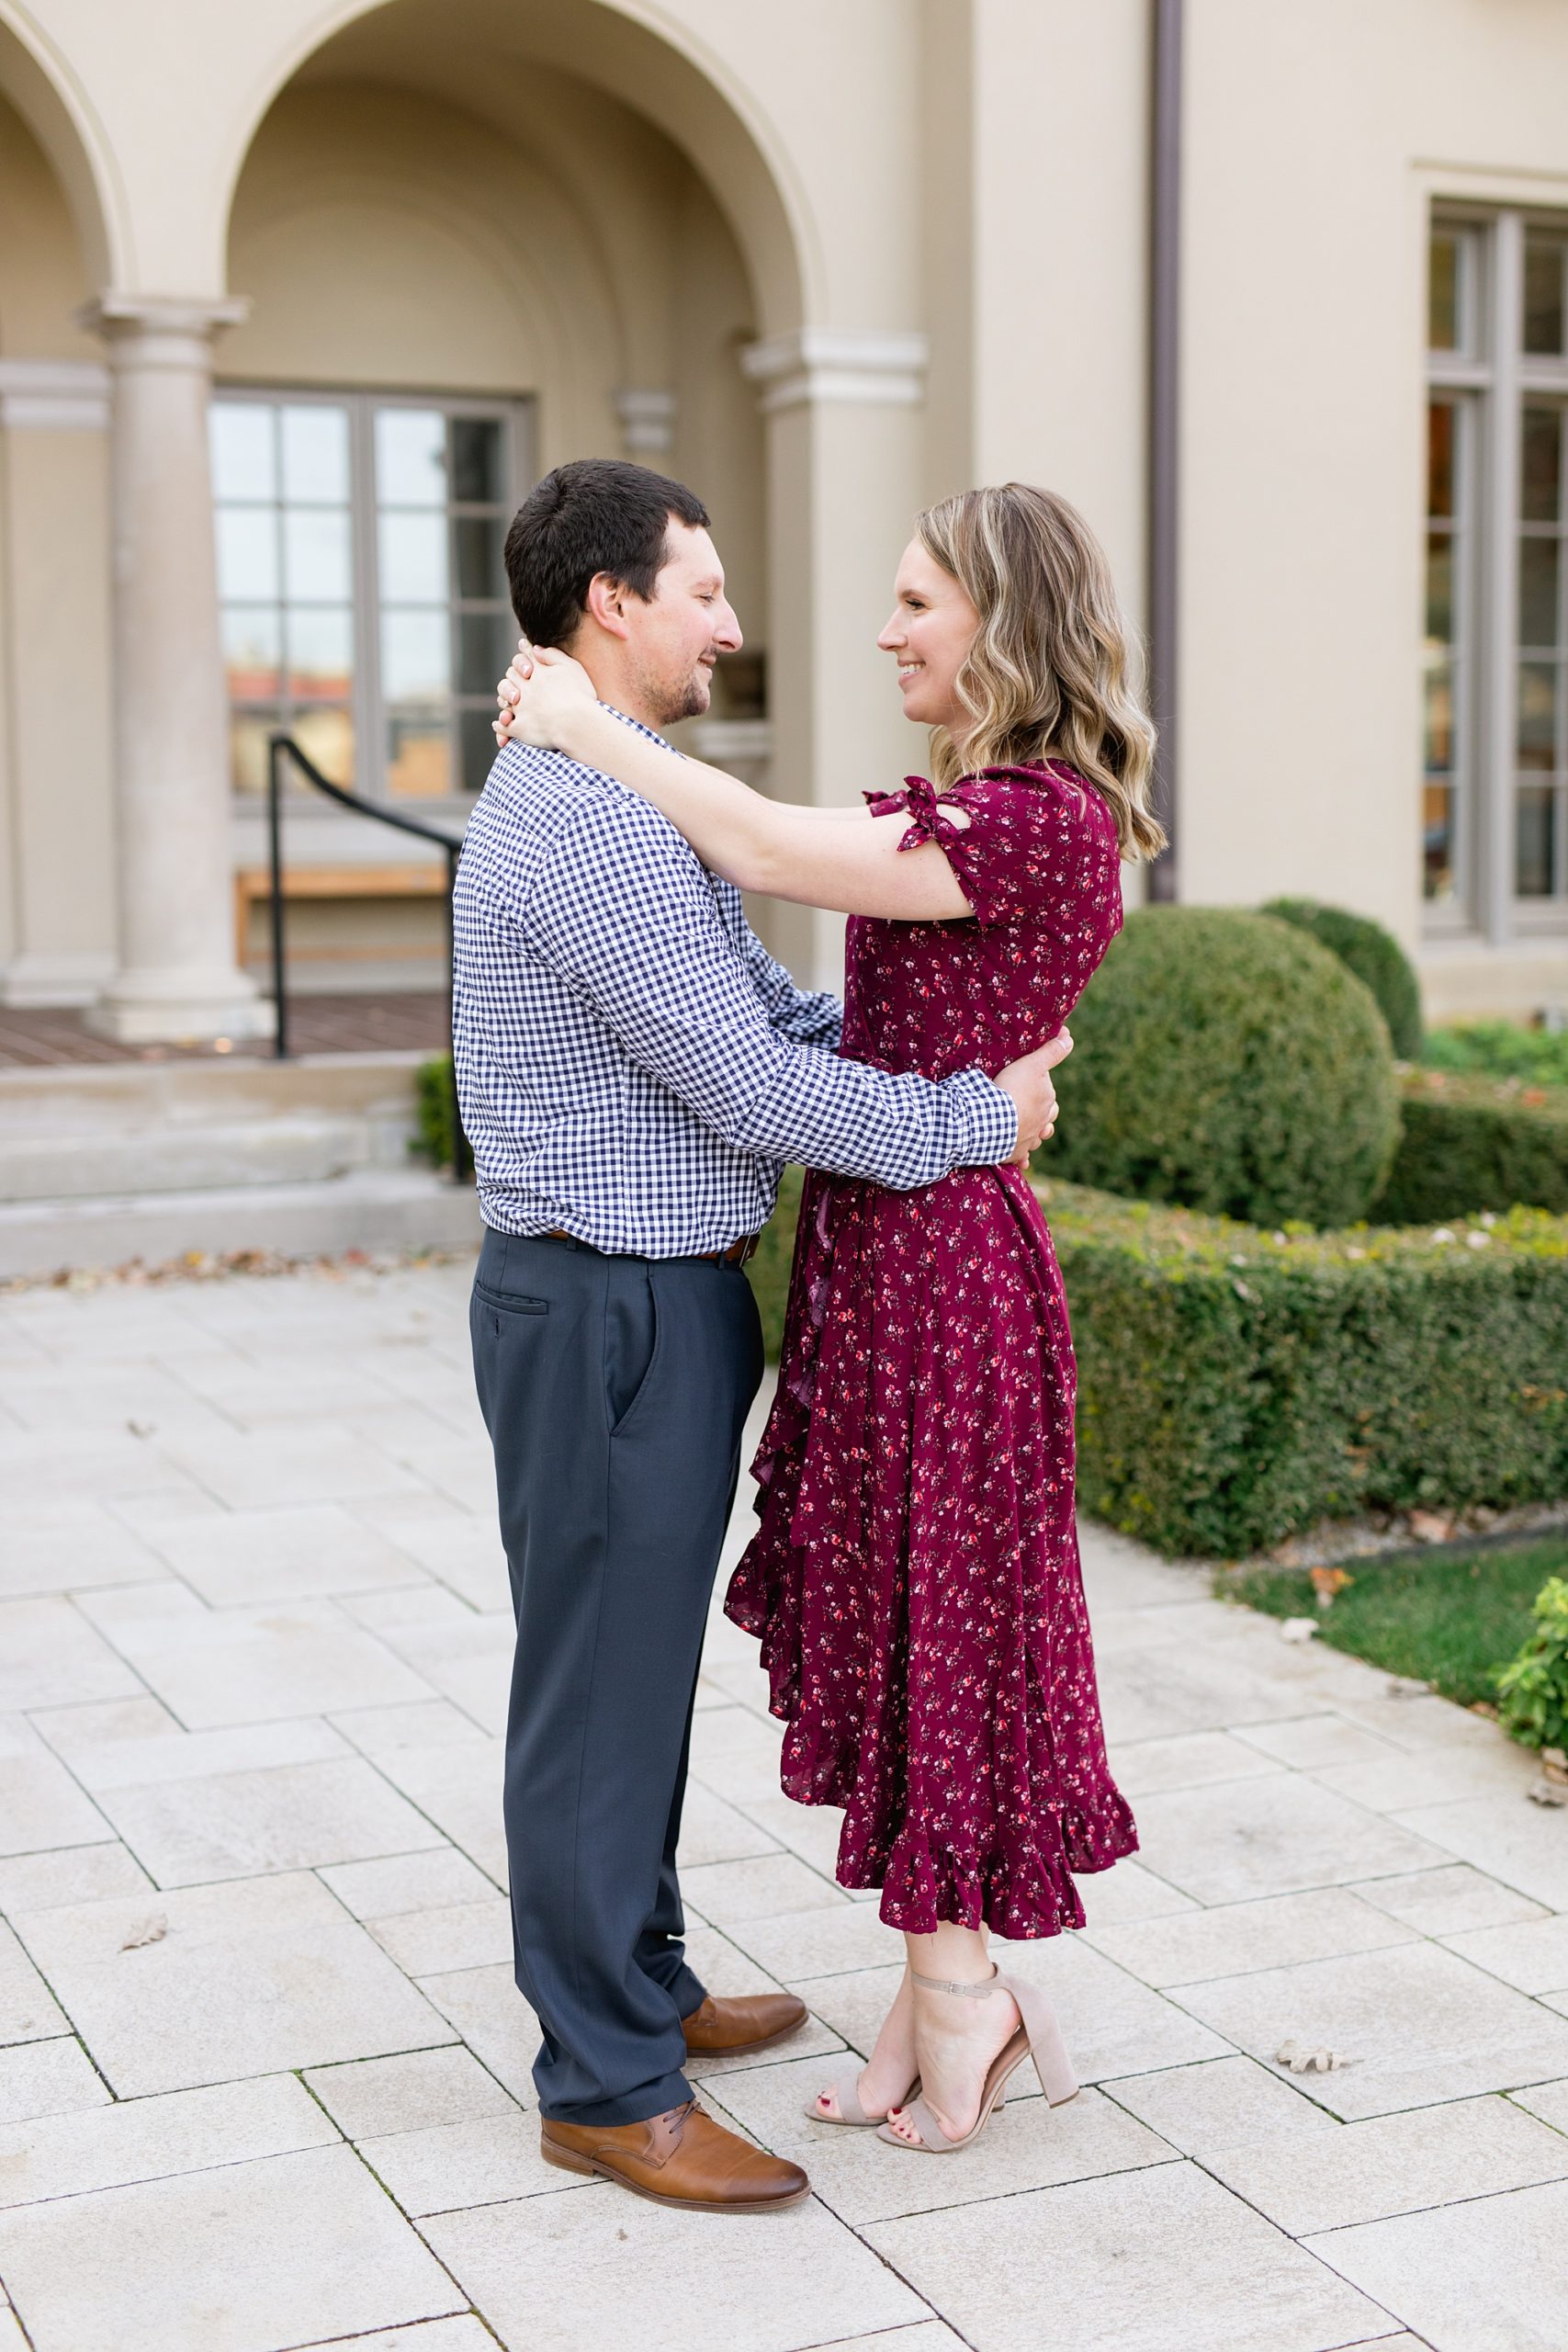 Dancing at engagement shoot | Breanne Rochelle Photography